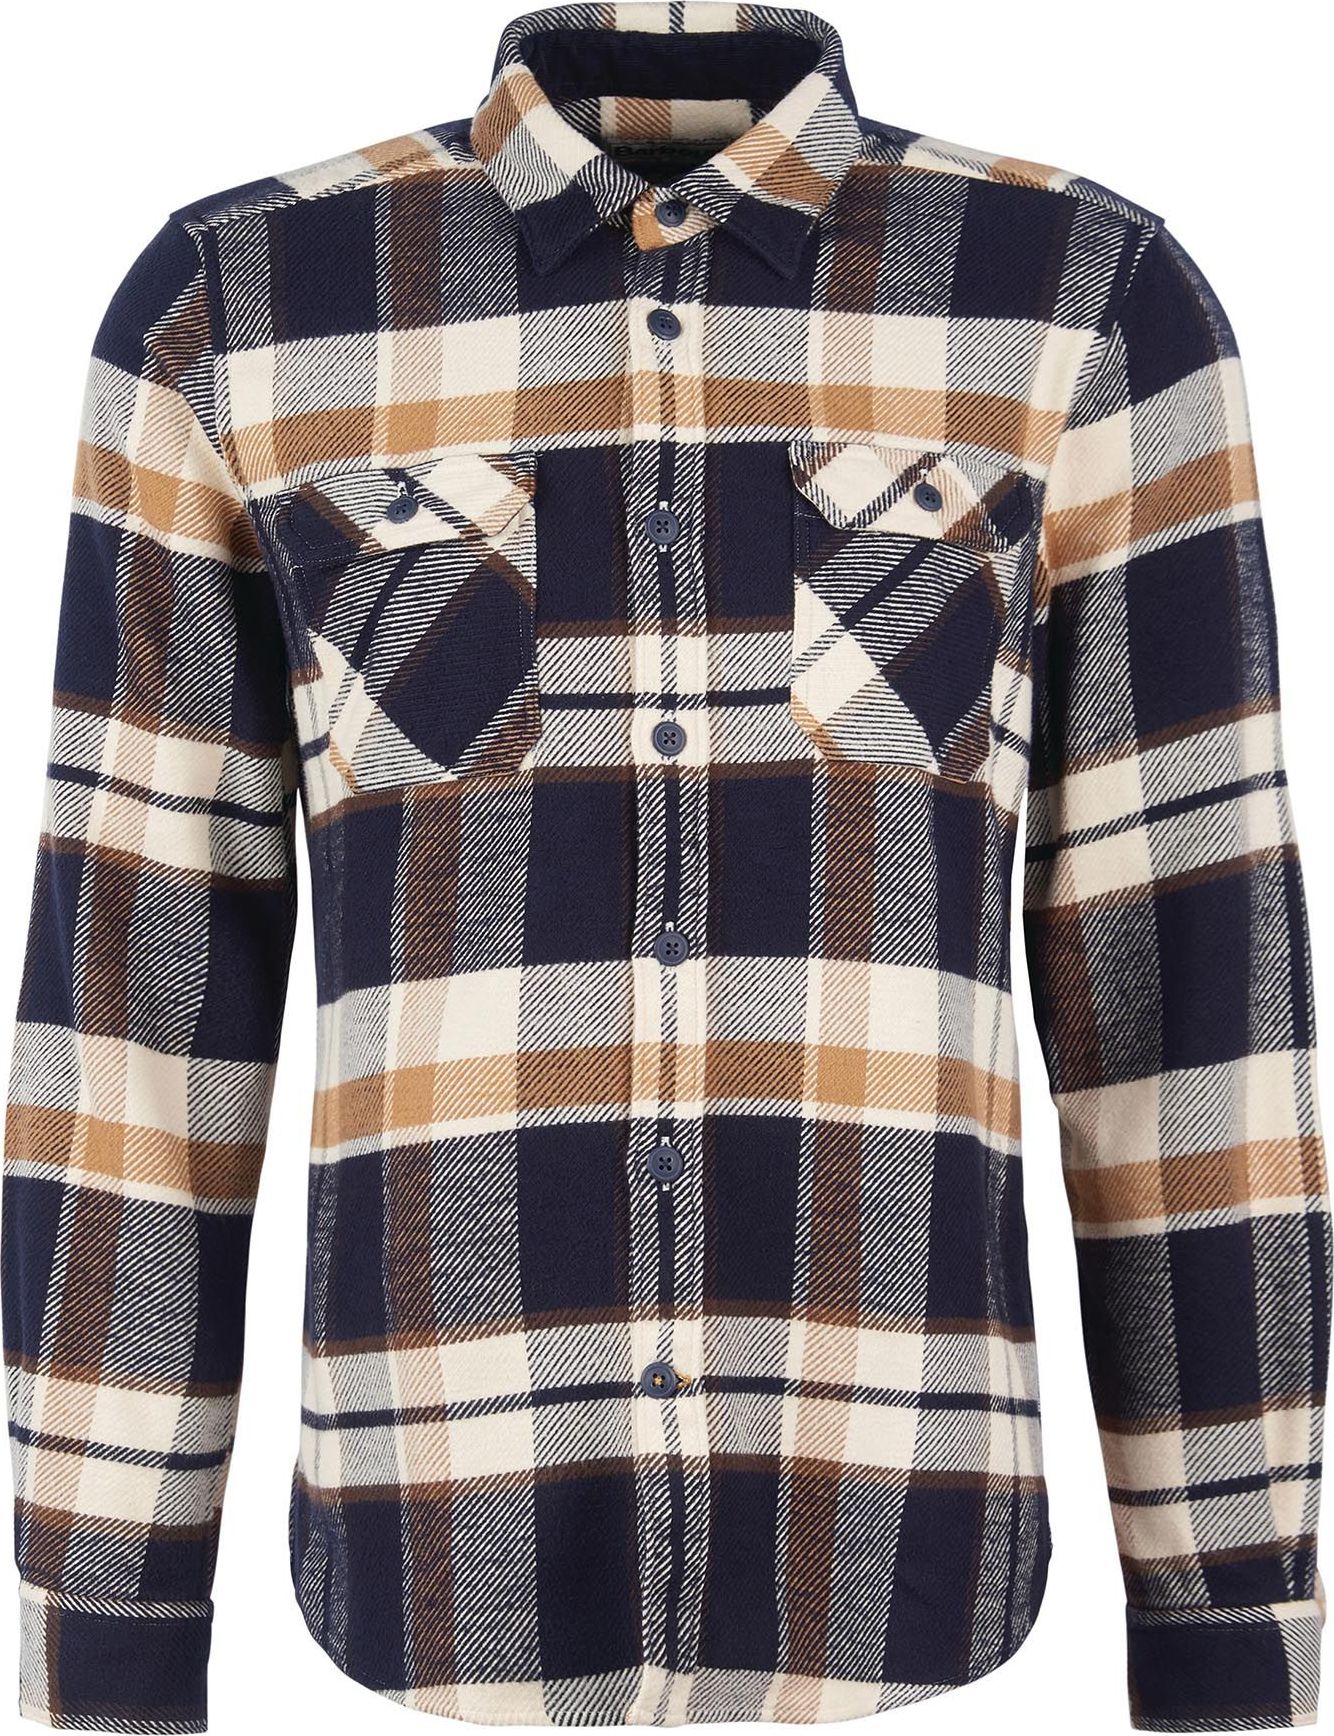 Barbour Men’s Mountain Shirt Tailored Fit Navy